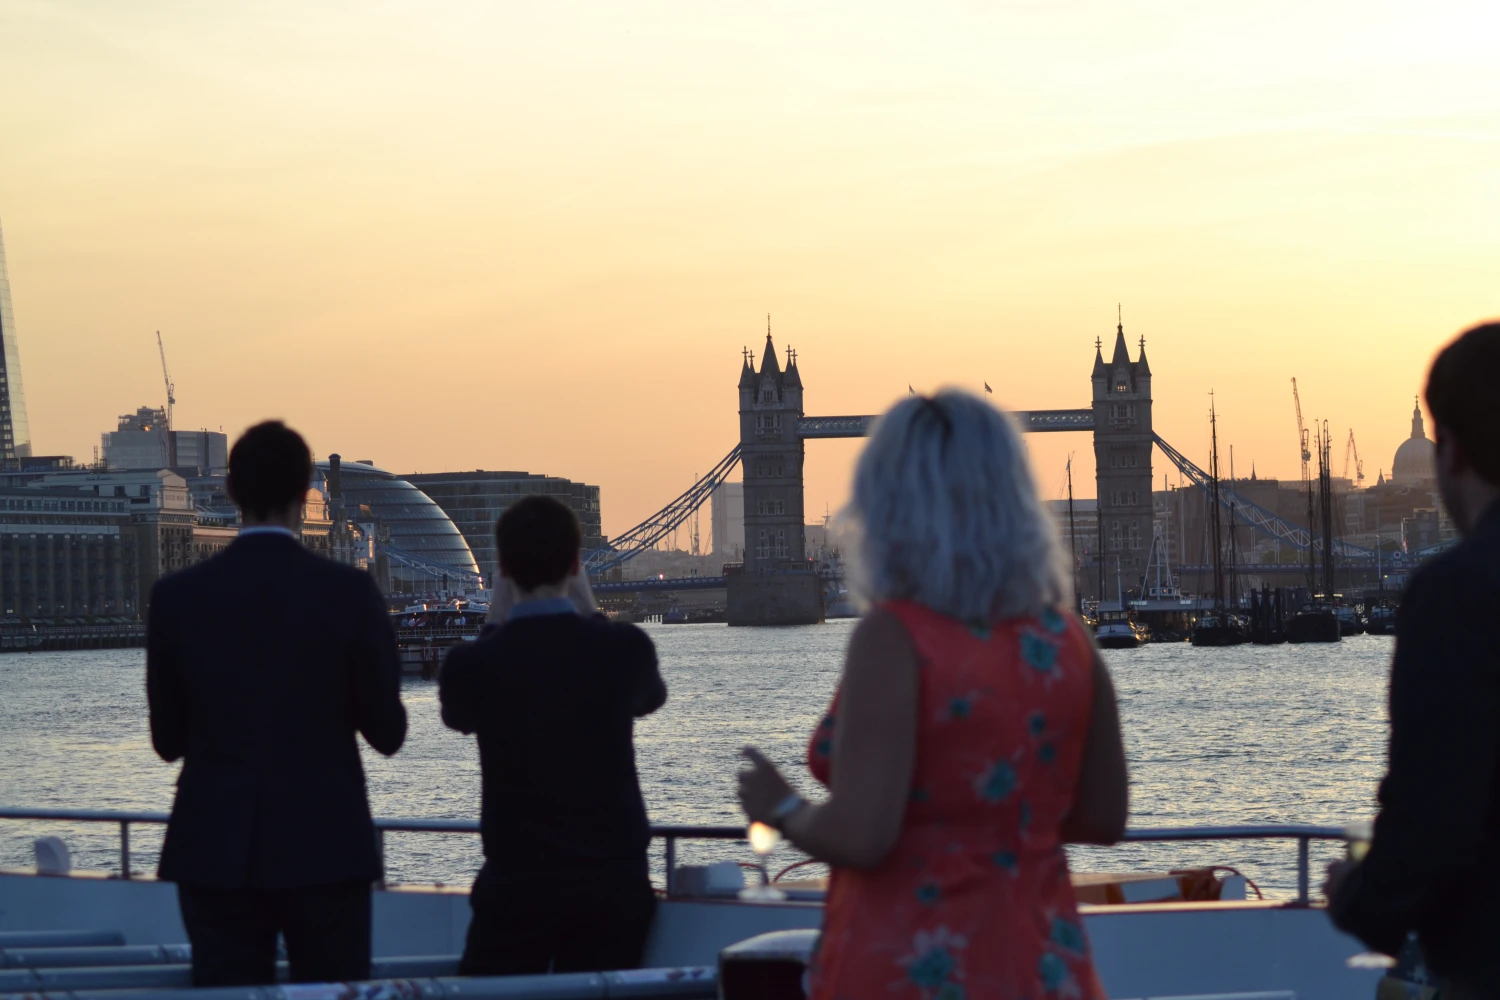 City Cruises -  Evening Cruise on the River Thames: What to expect - 1